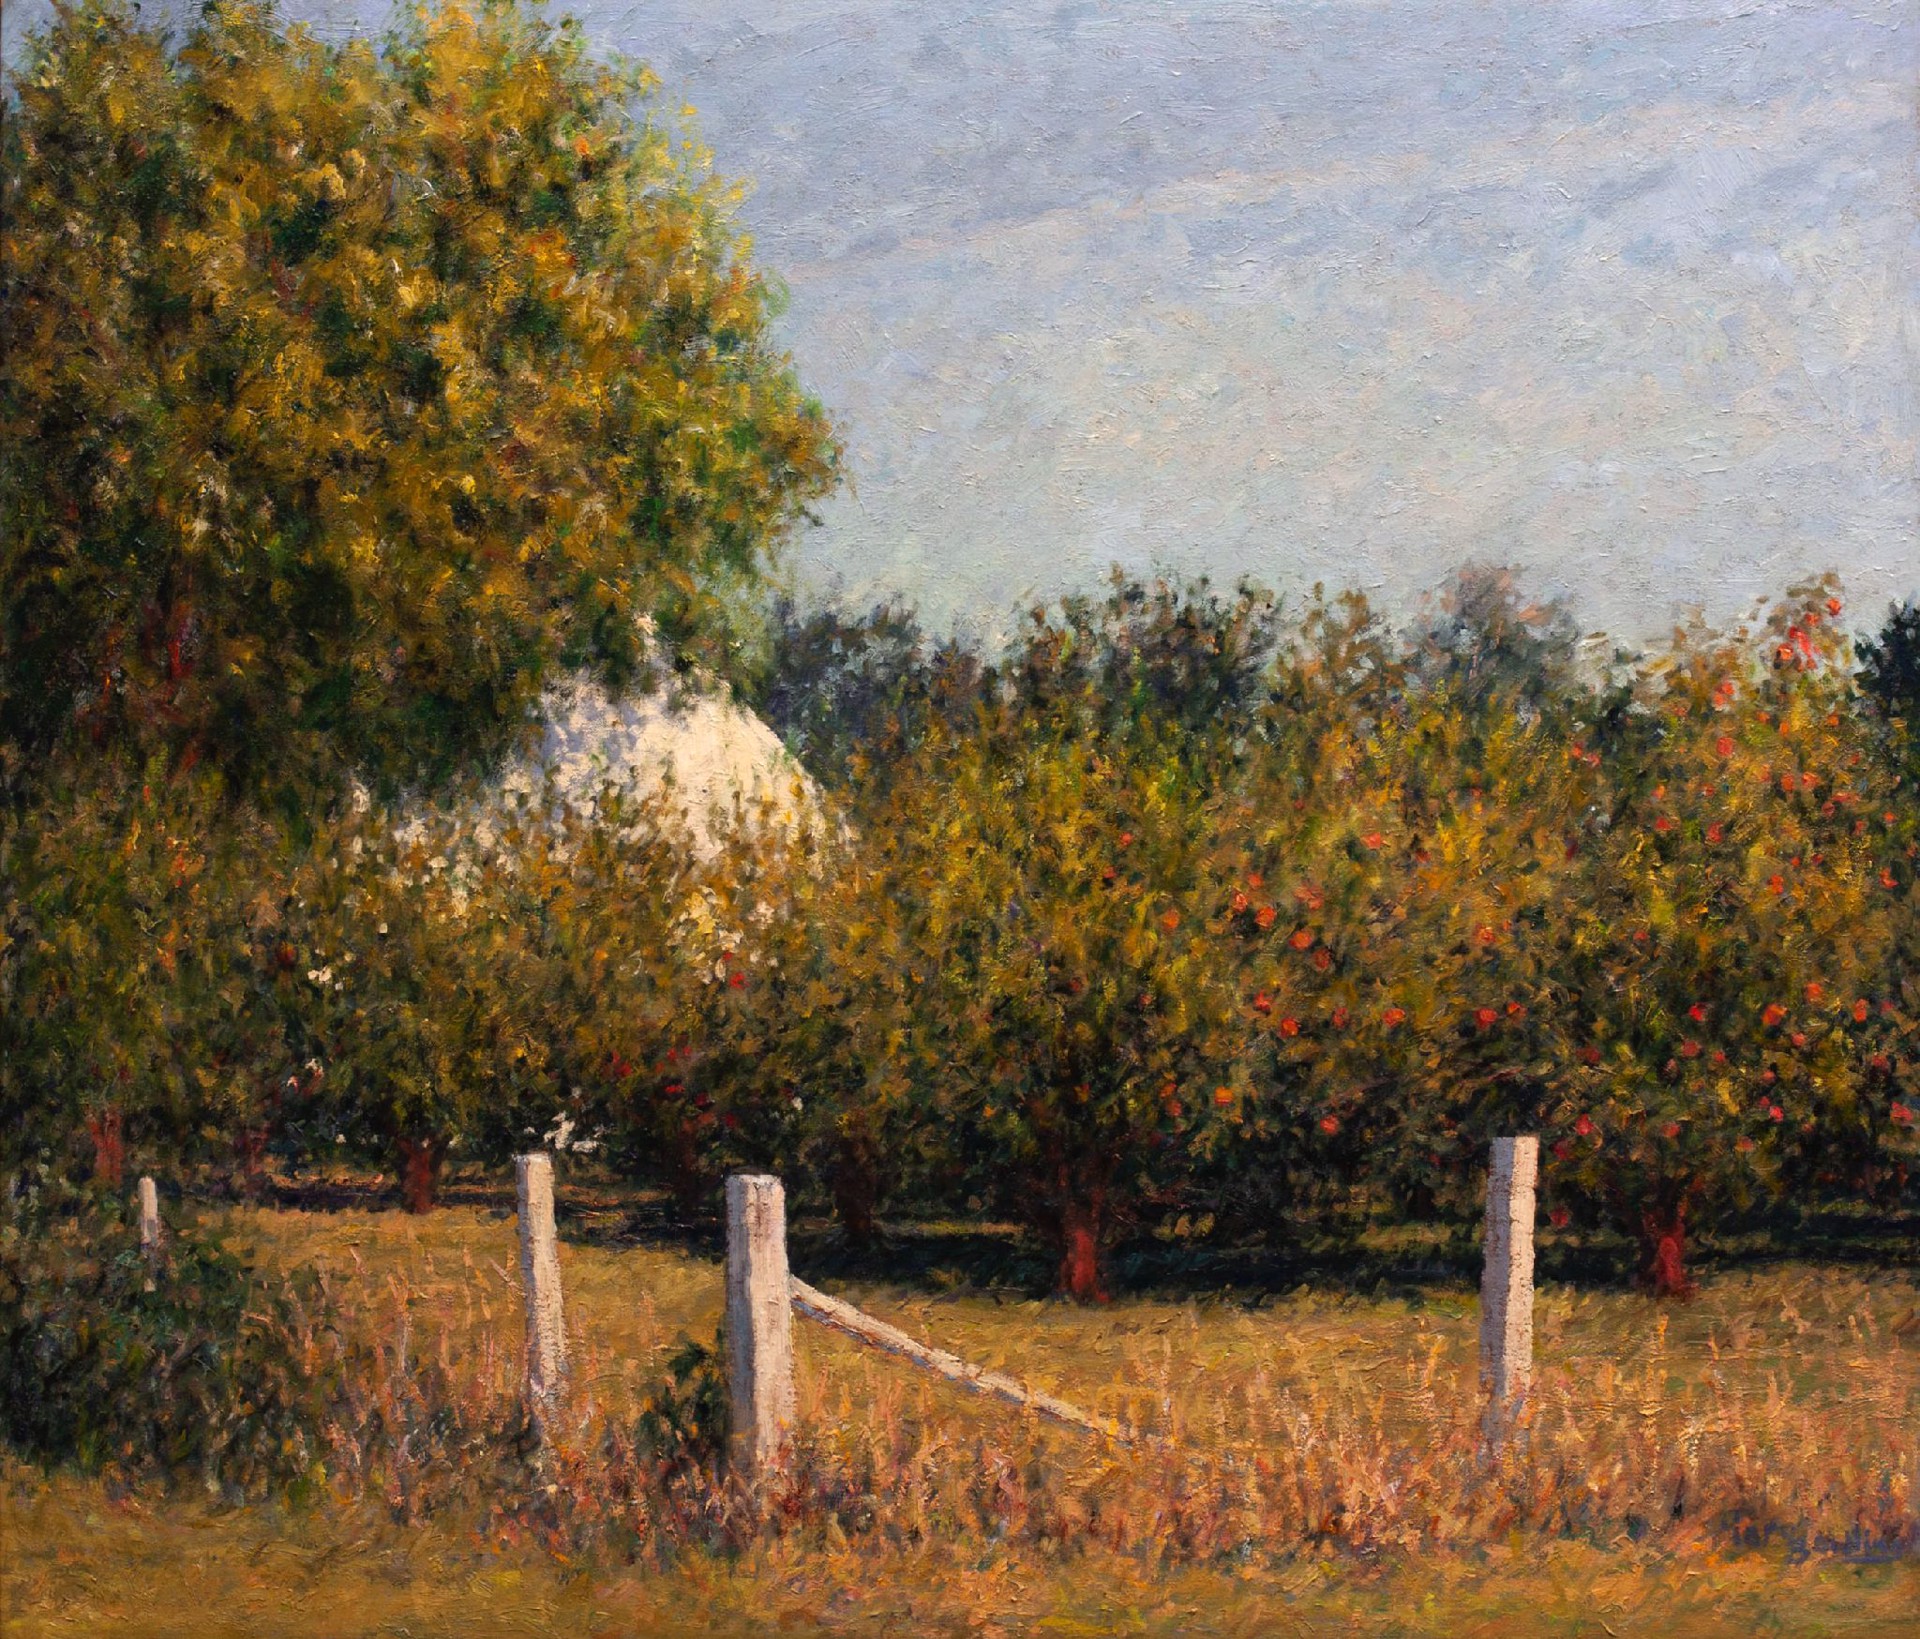 Kuhn's Orchard by Gary Bowling